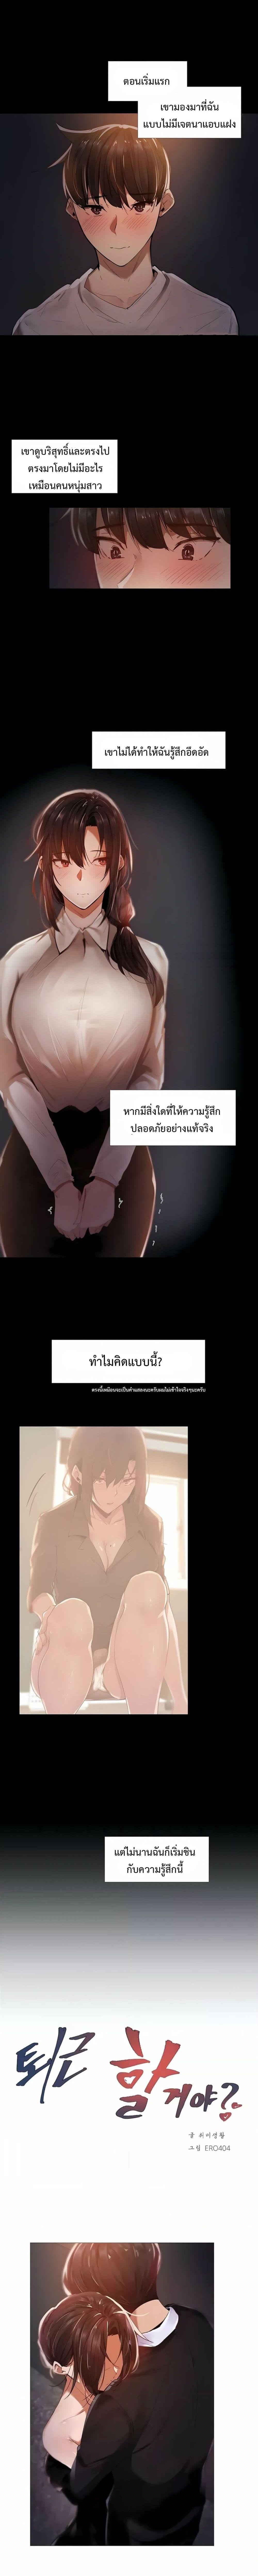 Let’s Do it After Work ตอนที่ 10 ภาพ 2